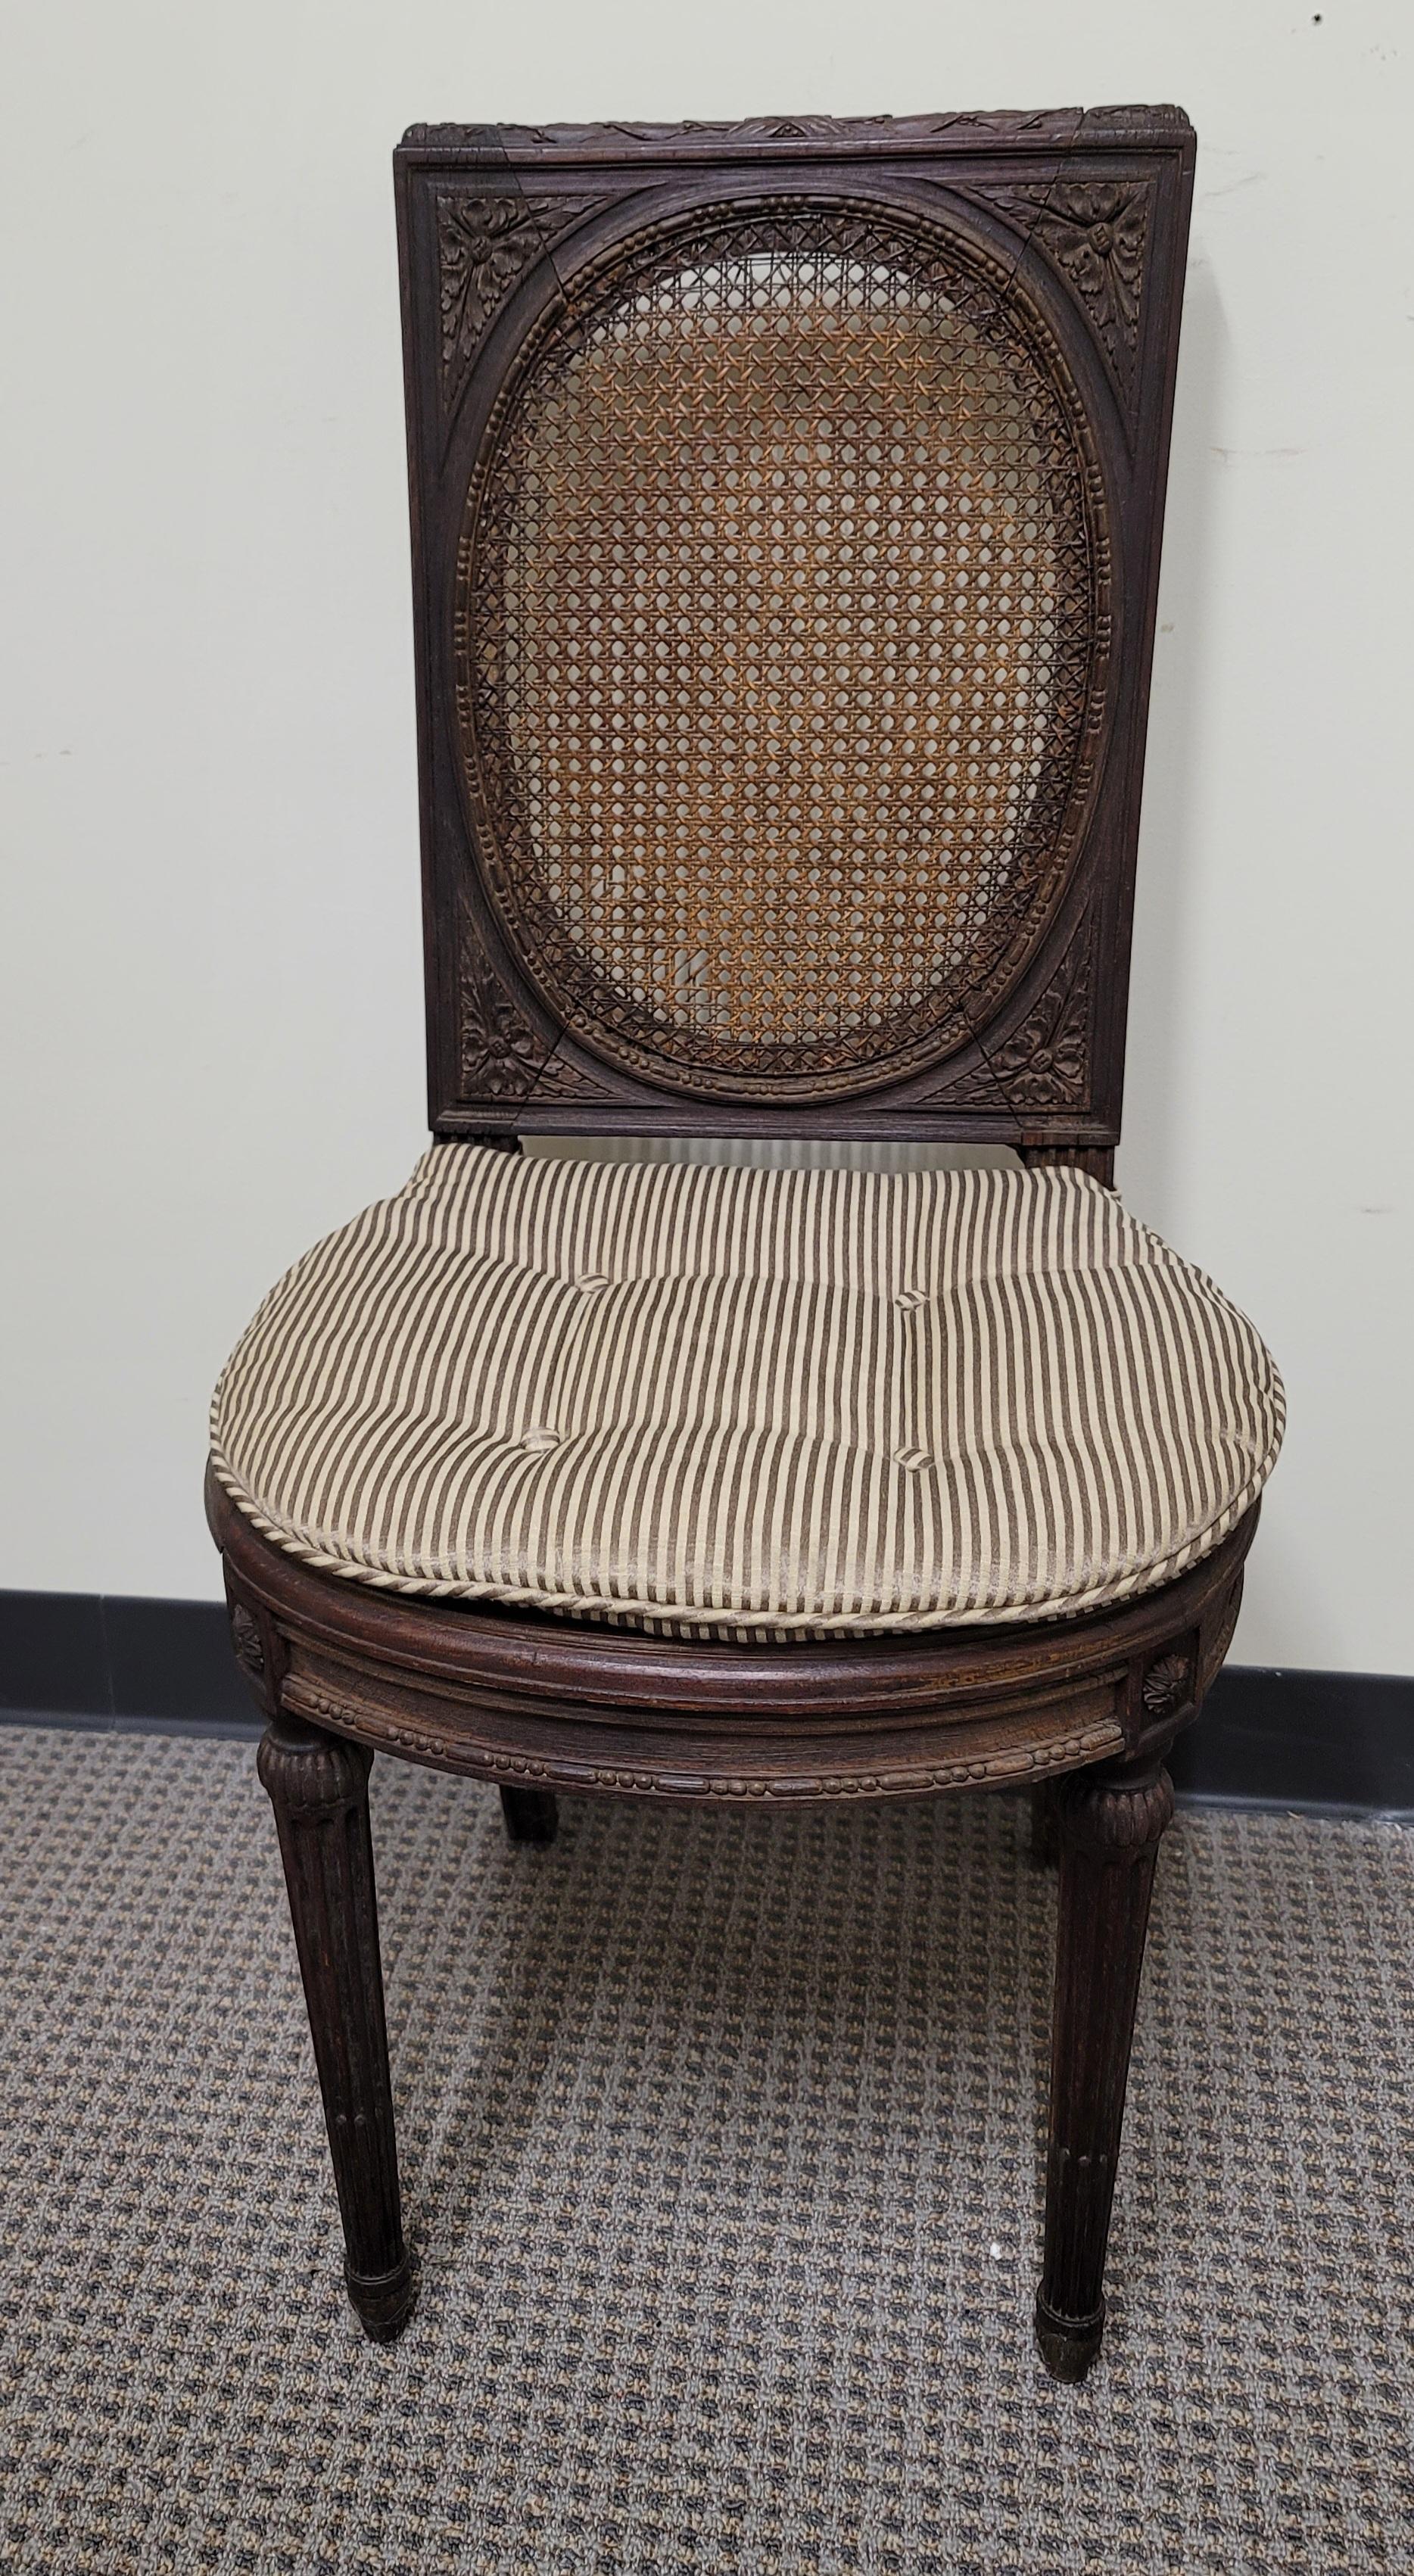 1860s French Fine Hand-Carved Walnut and Cane Side Chair For Sale 7